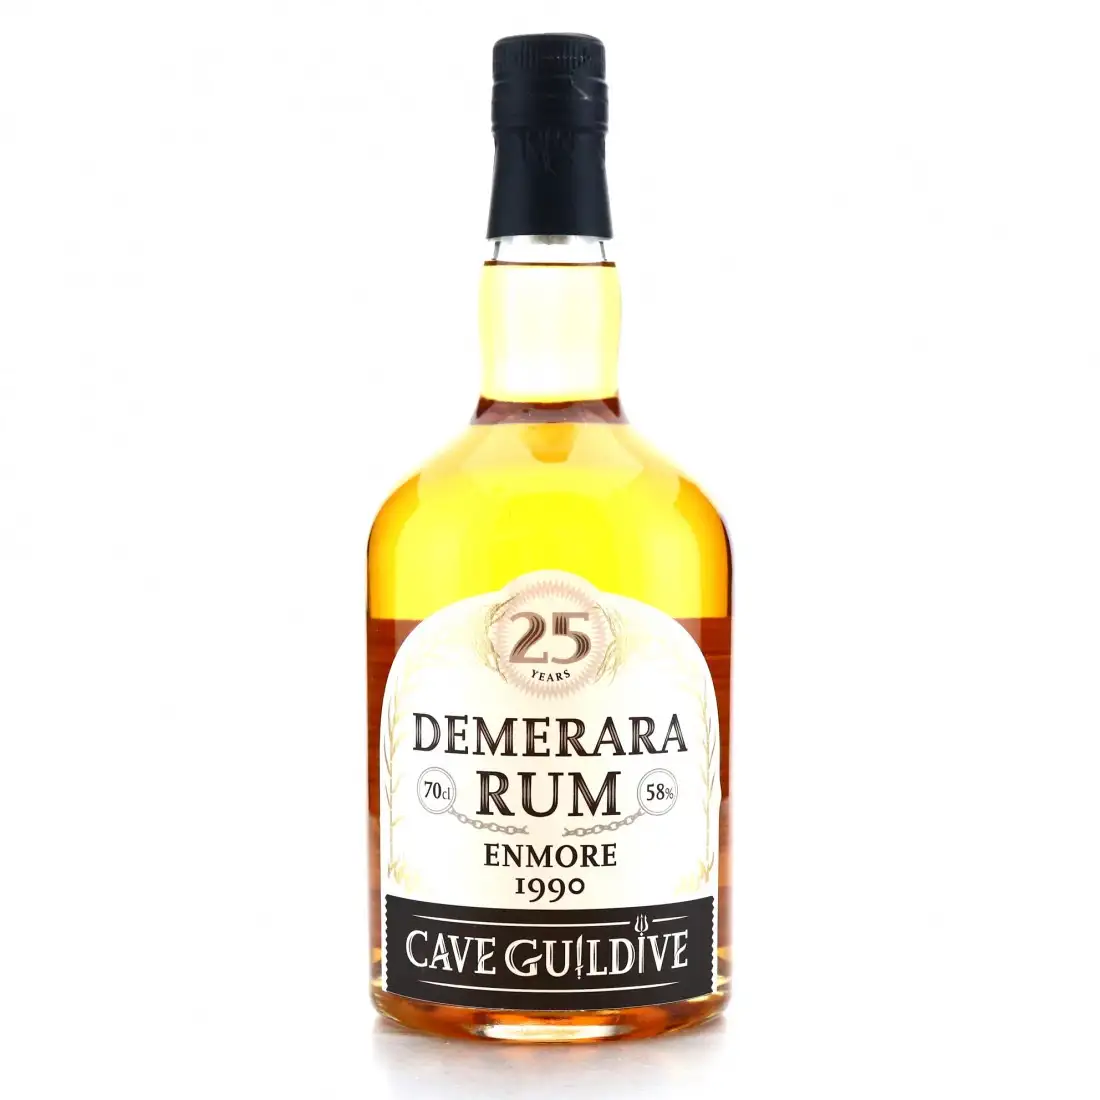 Image of the front of the bottle of the rum Demerara Rum MEV